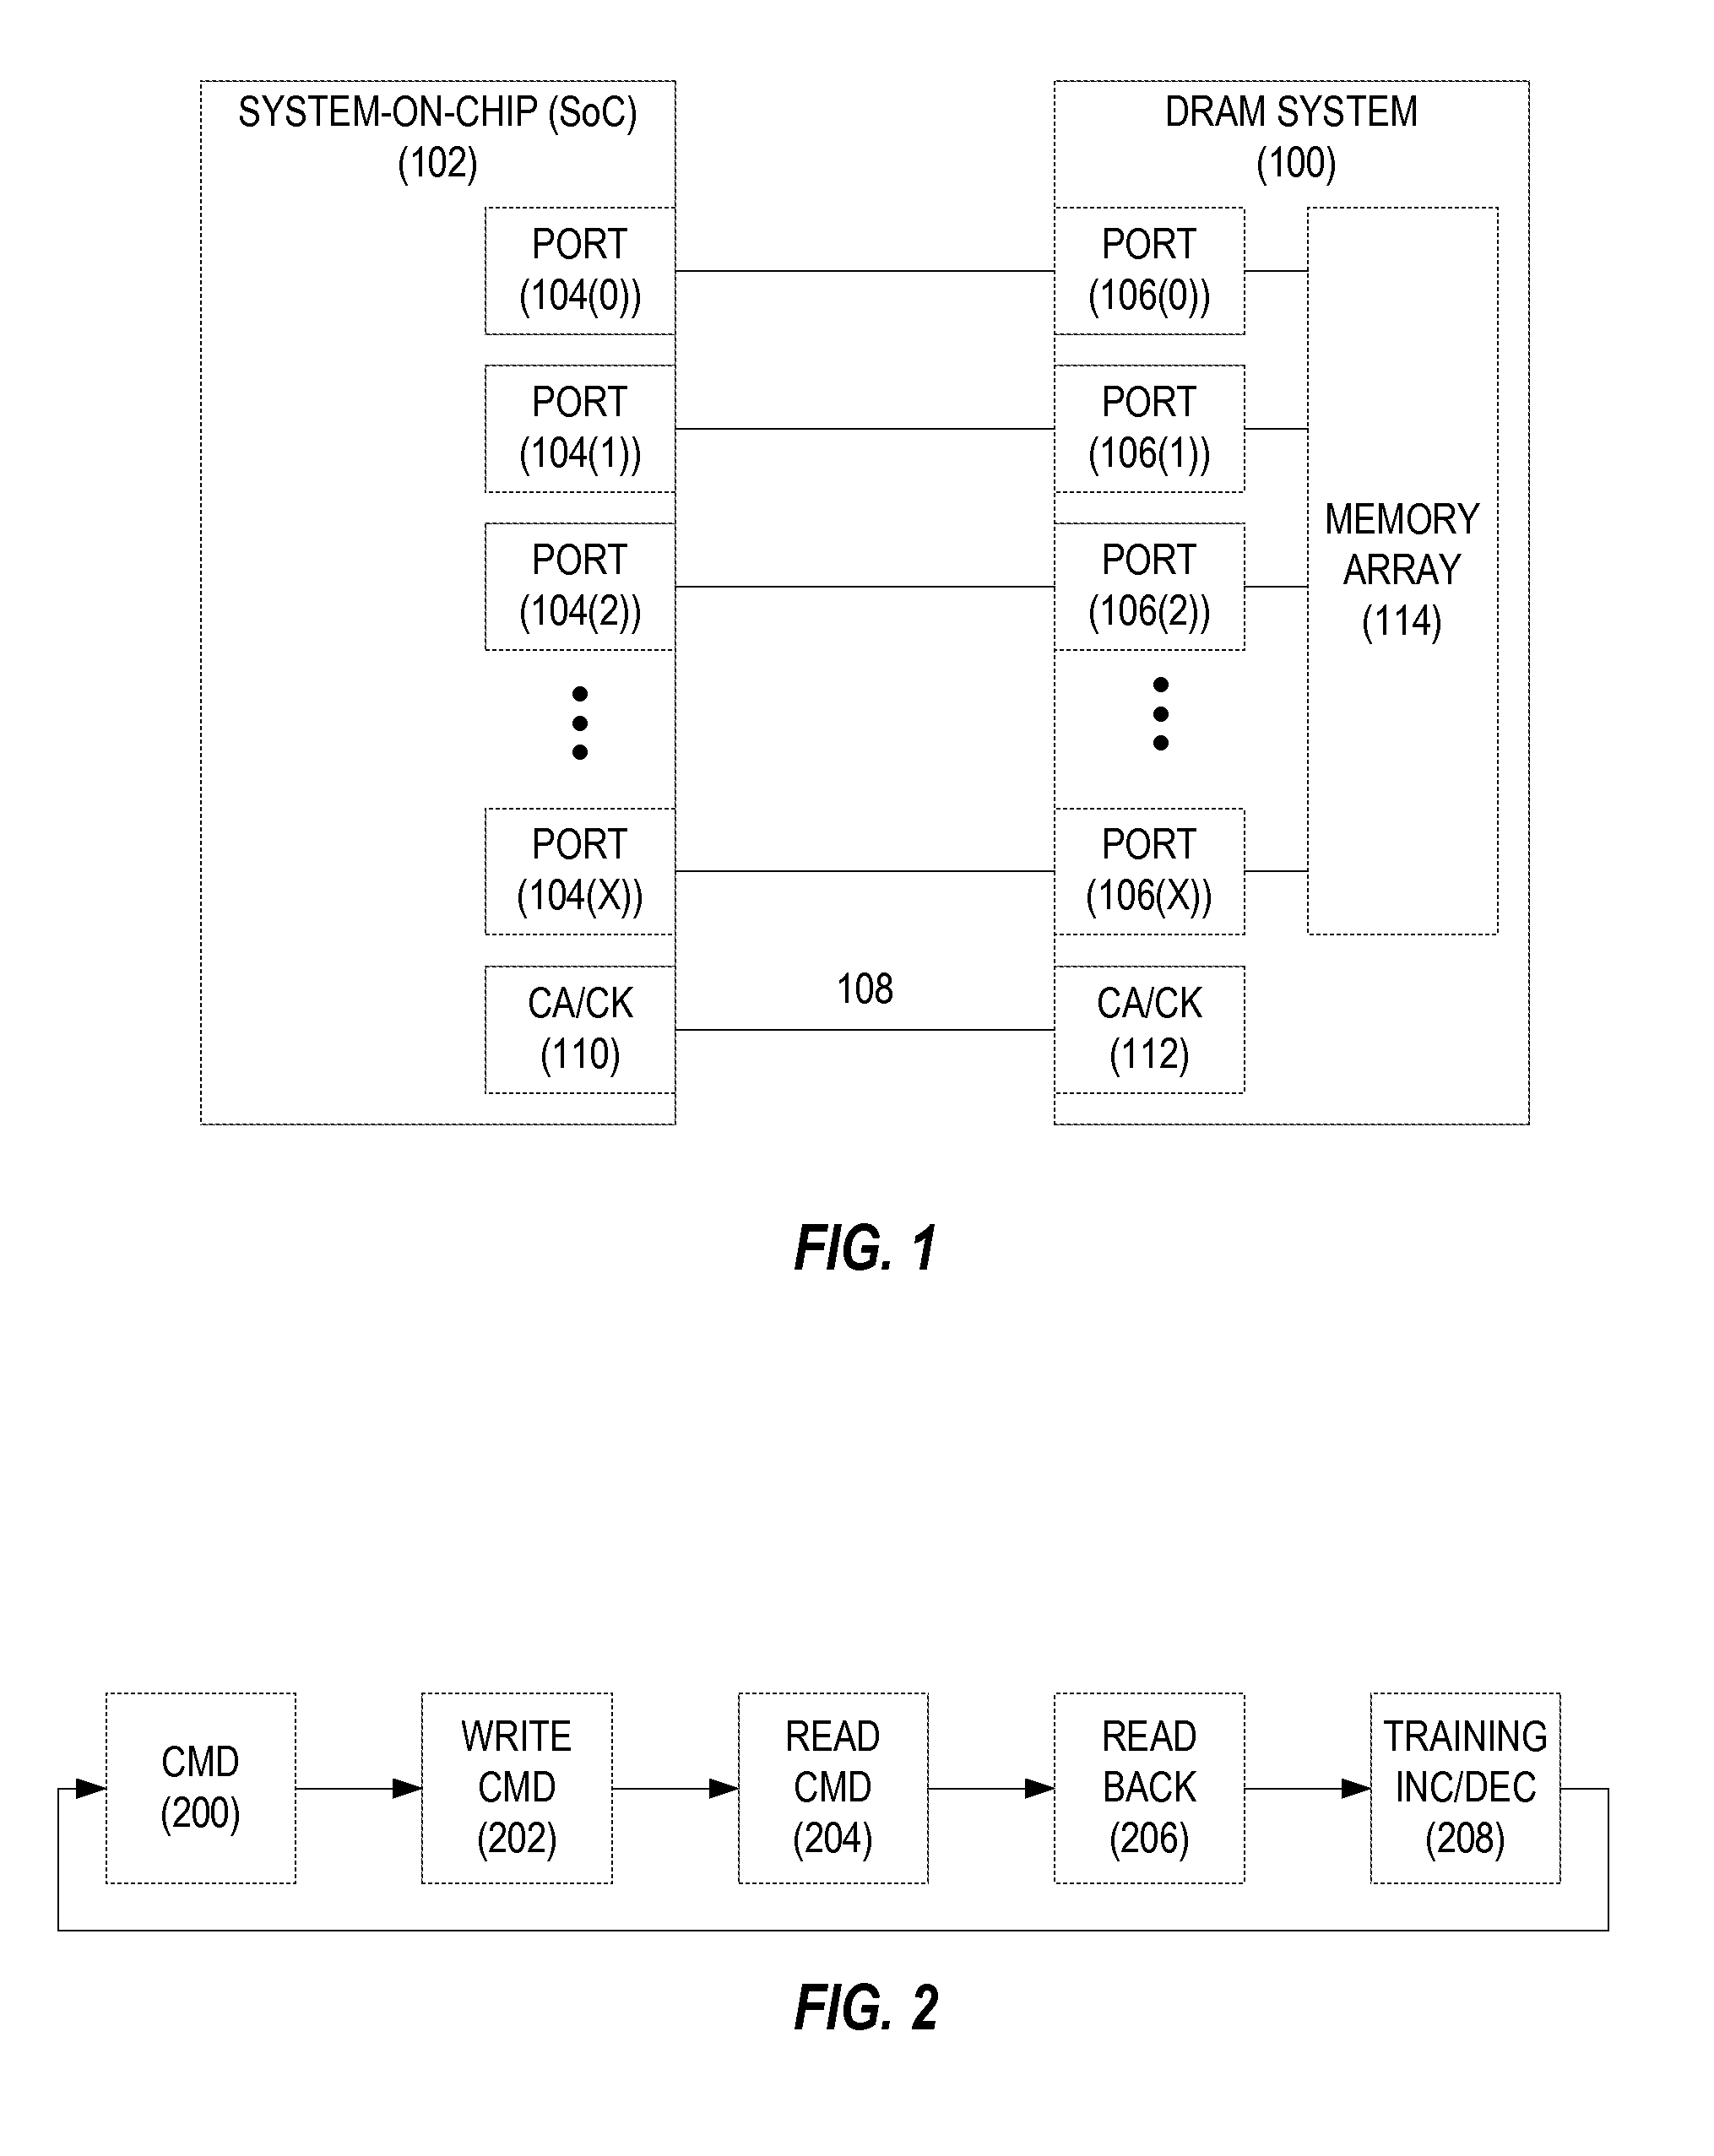 Providing memory training of dynamic random access memory (DRAM) systems using port-to-port loopbacks, and related methods, systems, and apparatuses